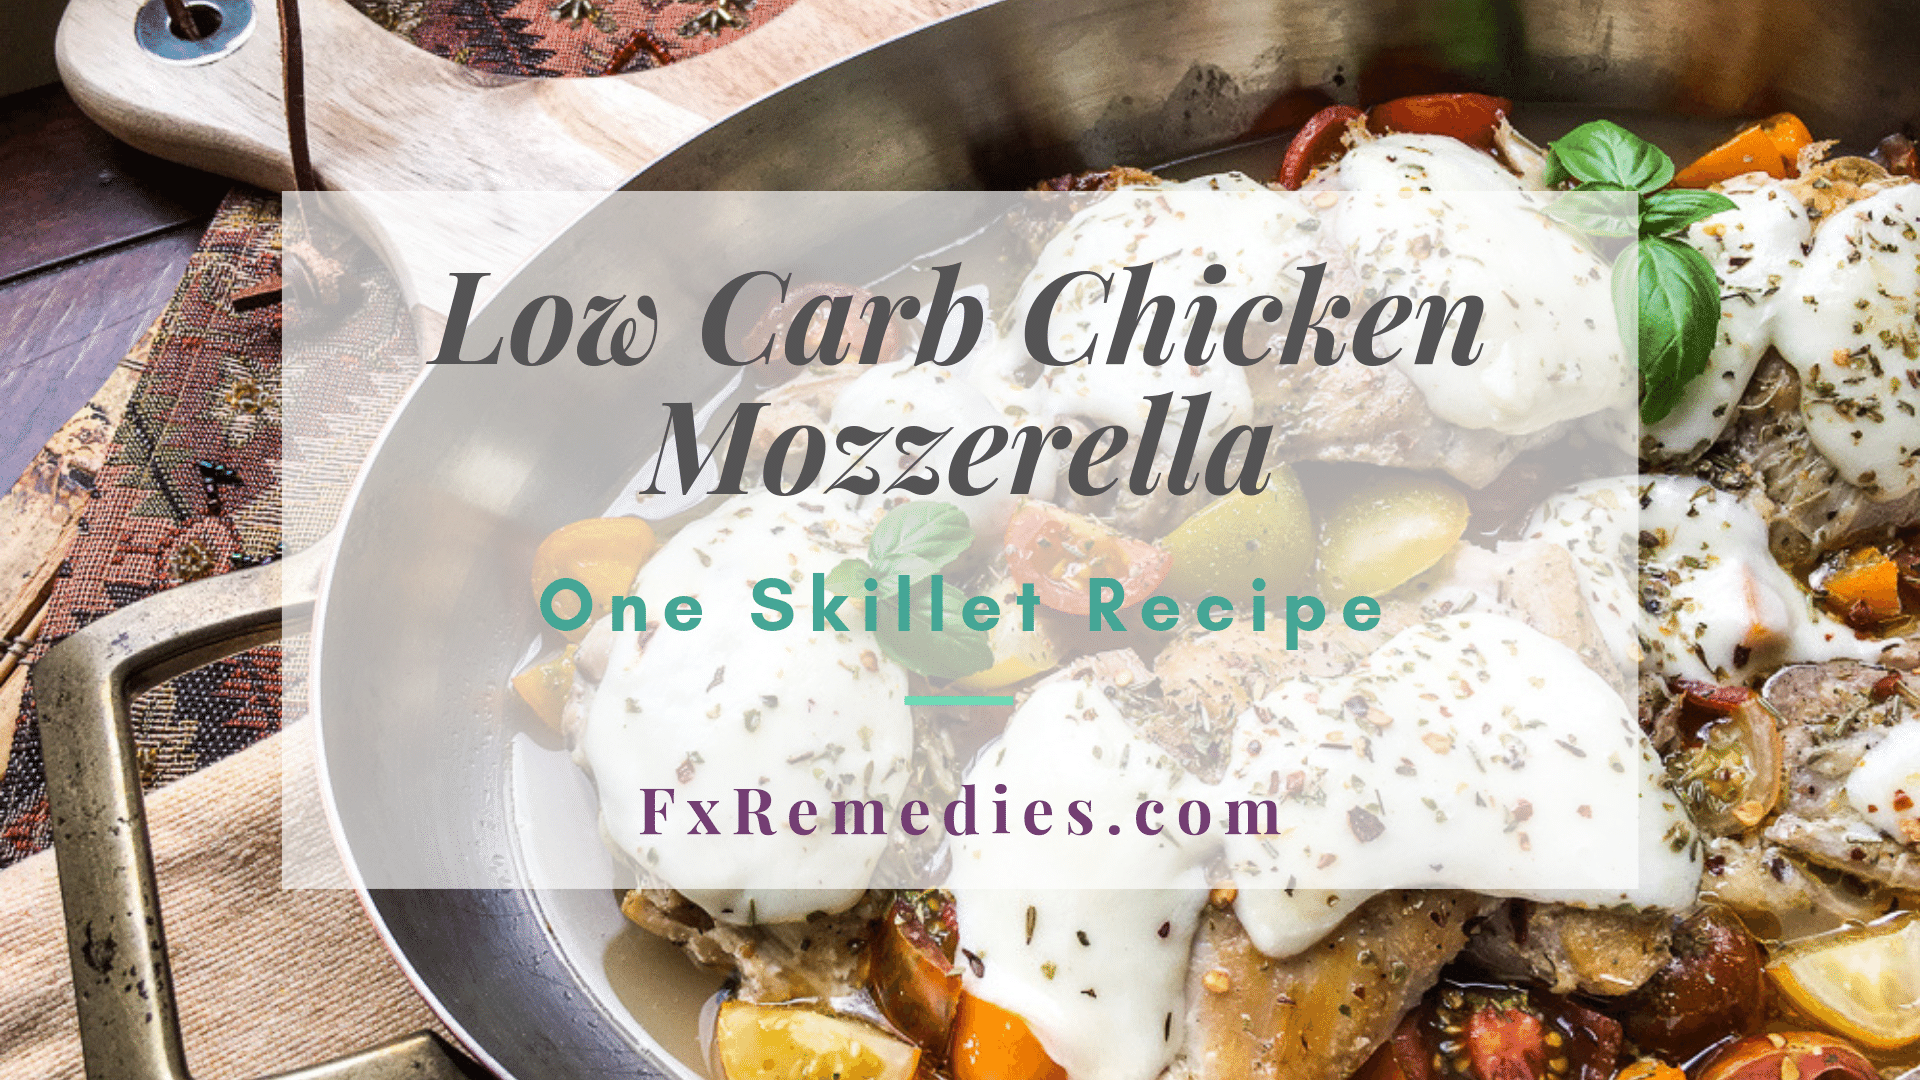 This recipe is my go-to low carb chicken recipe! It's super easy and great when your short on time. That is everyday for me with 3 little ones running around, a hou